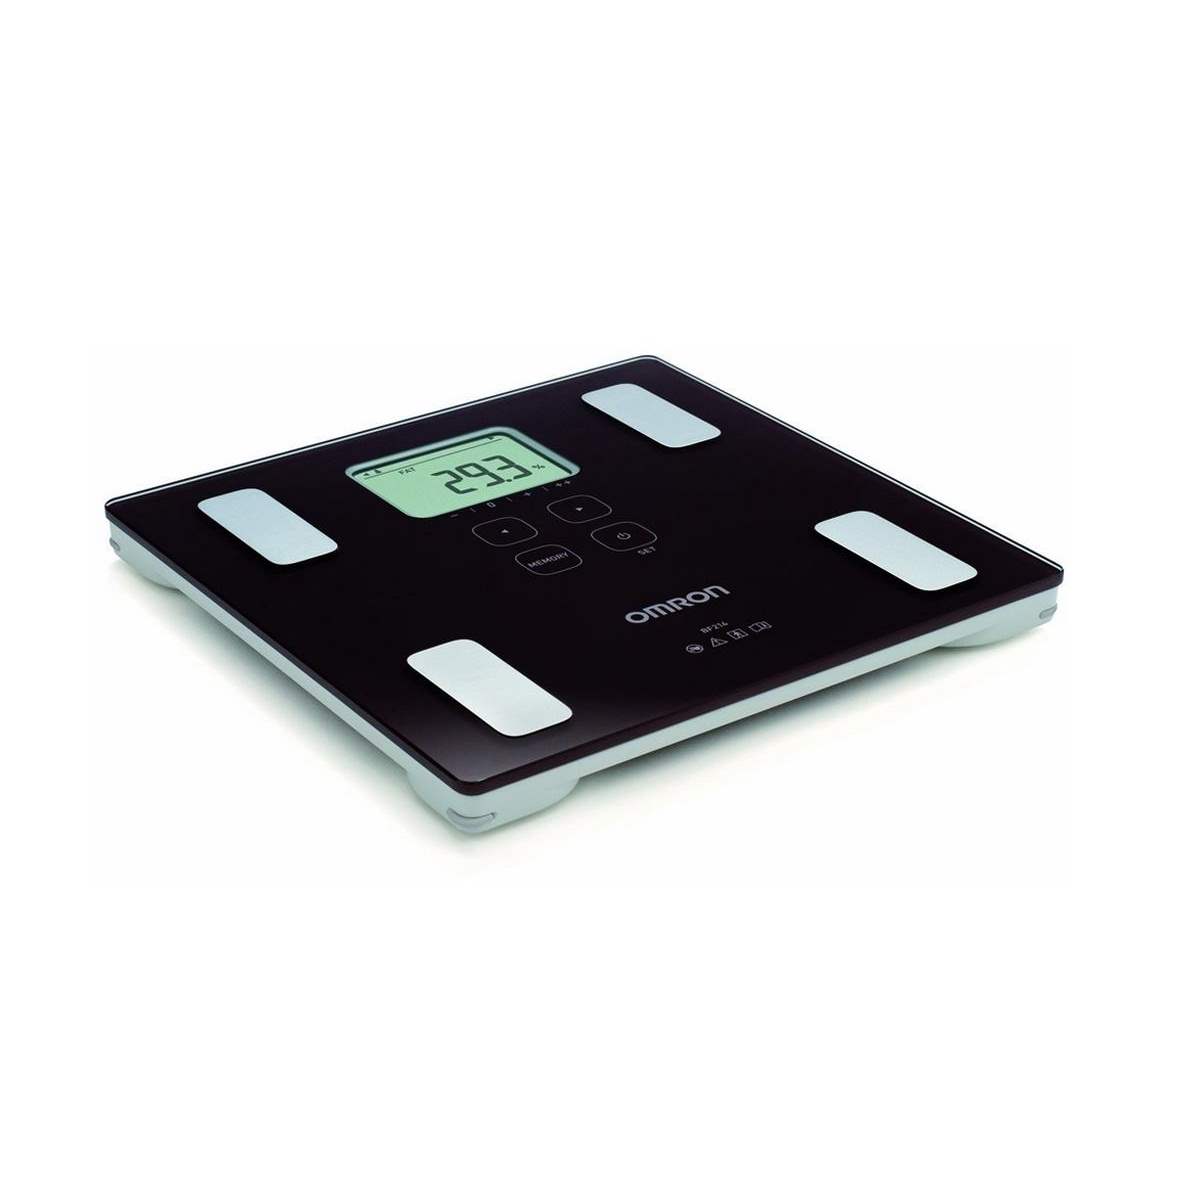 Body Composition Scale HBF-212-EW by Omron